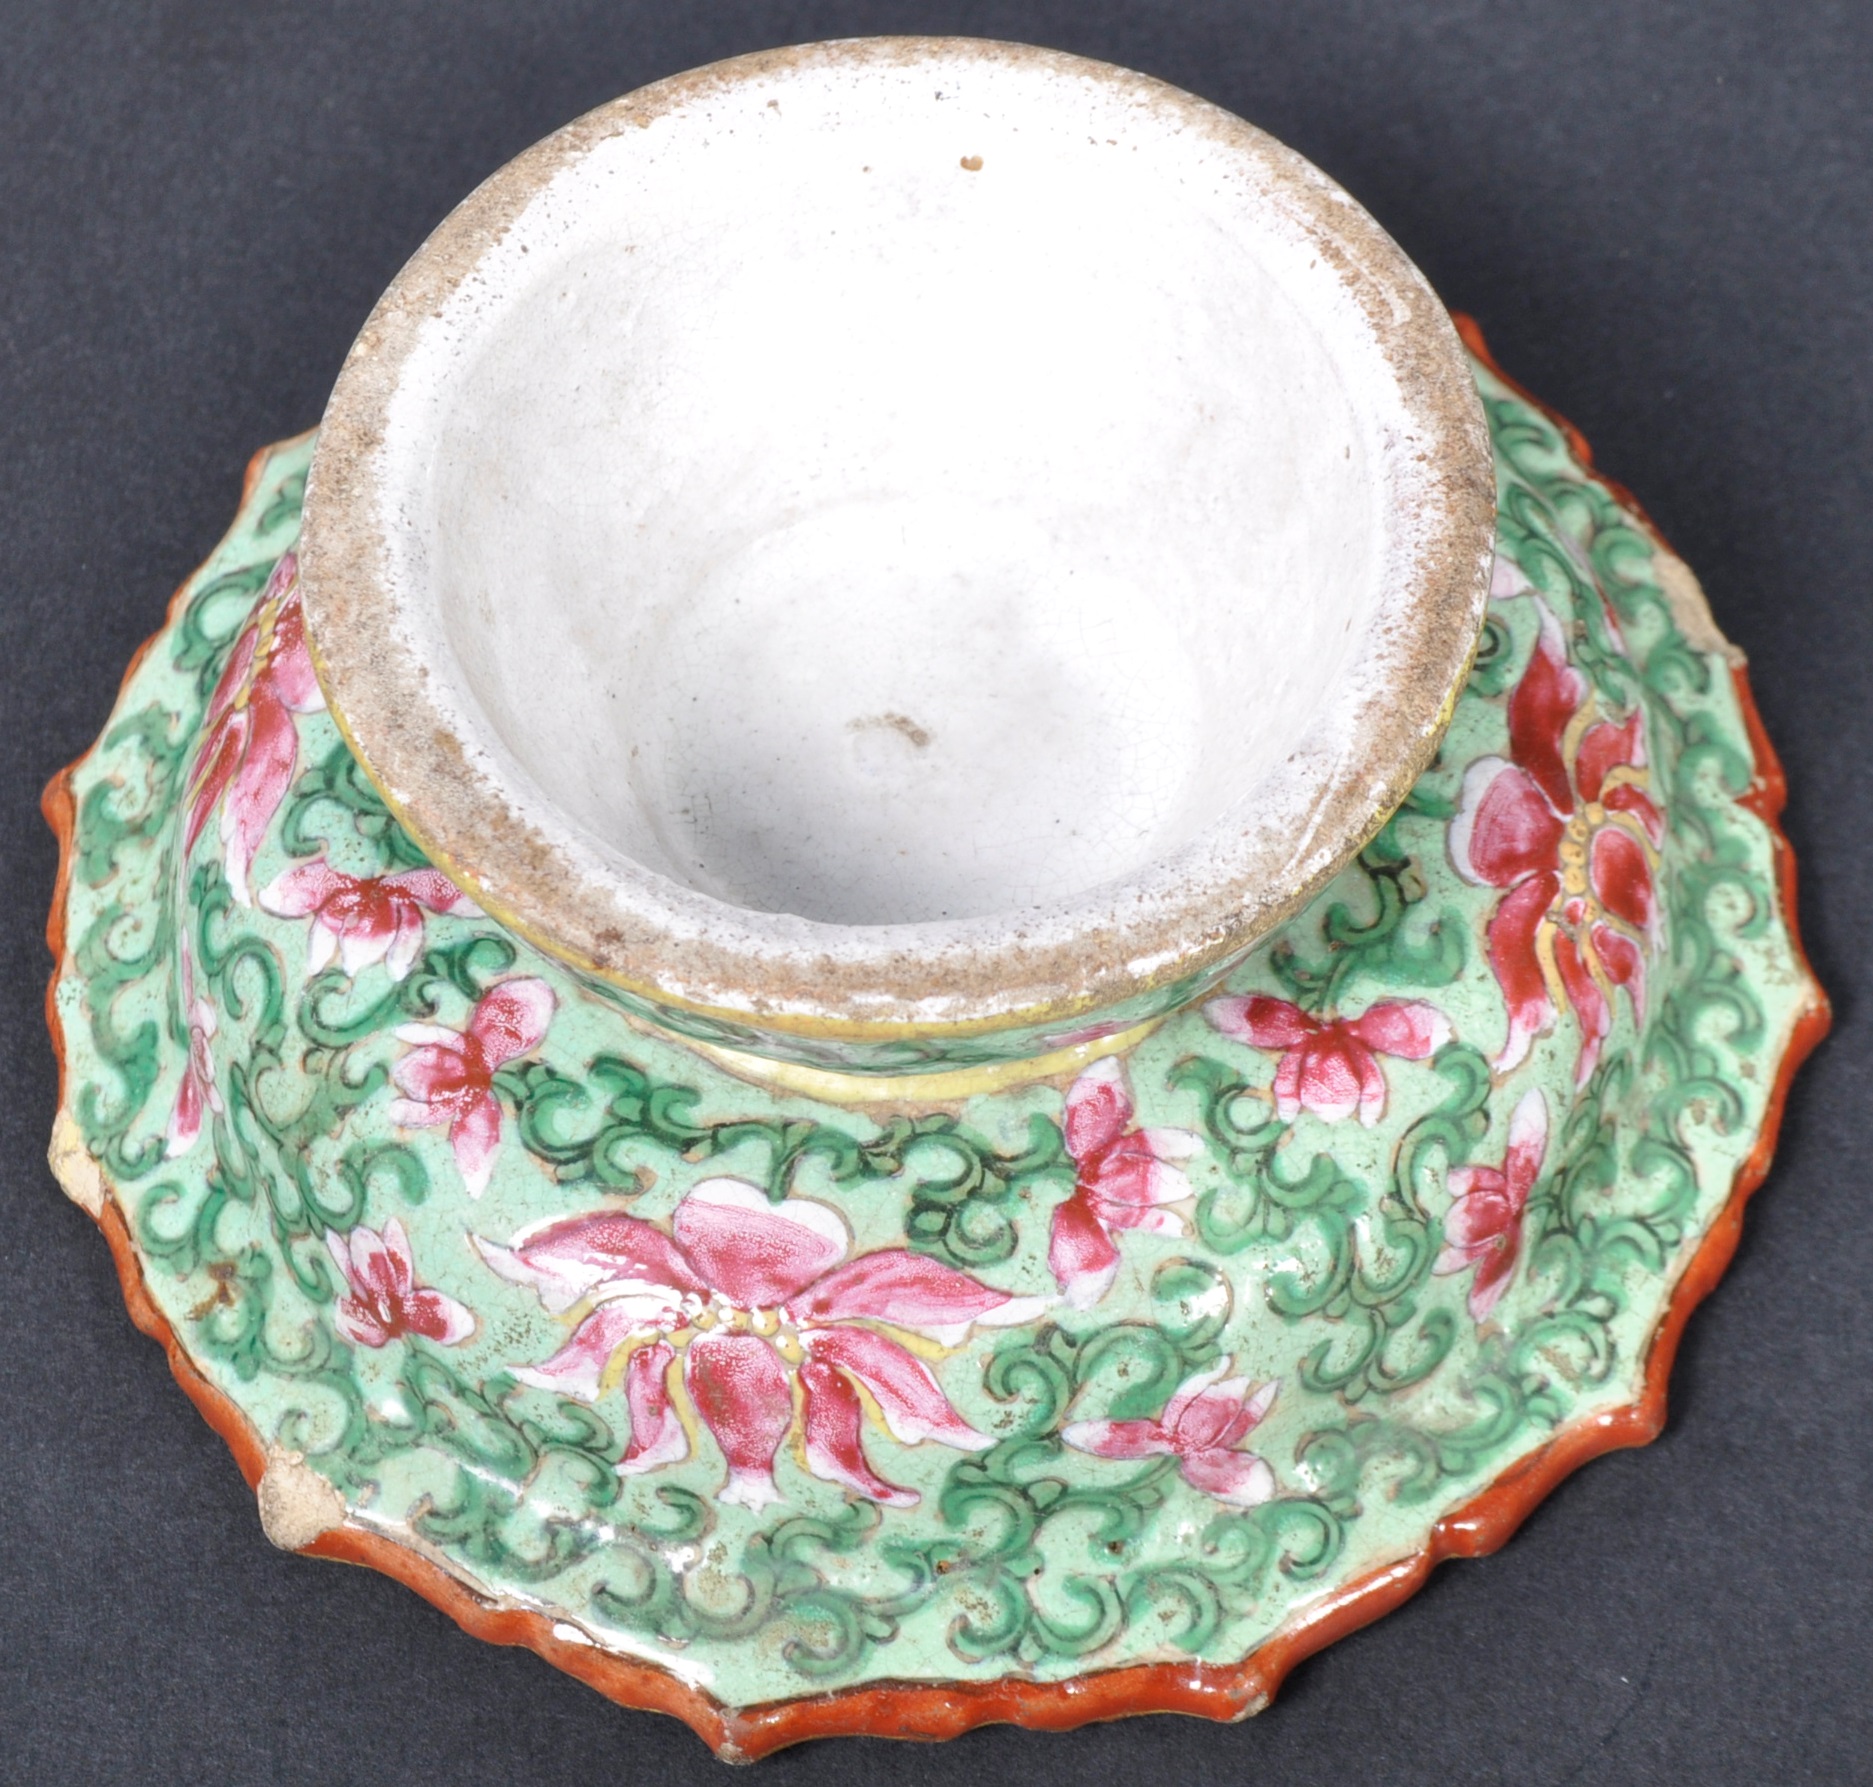 EARLY 19TH CENTURY CHINESE BENCHARONG TAZZA - Image 8 of 8